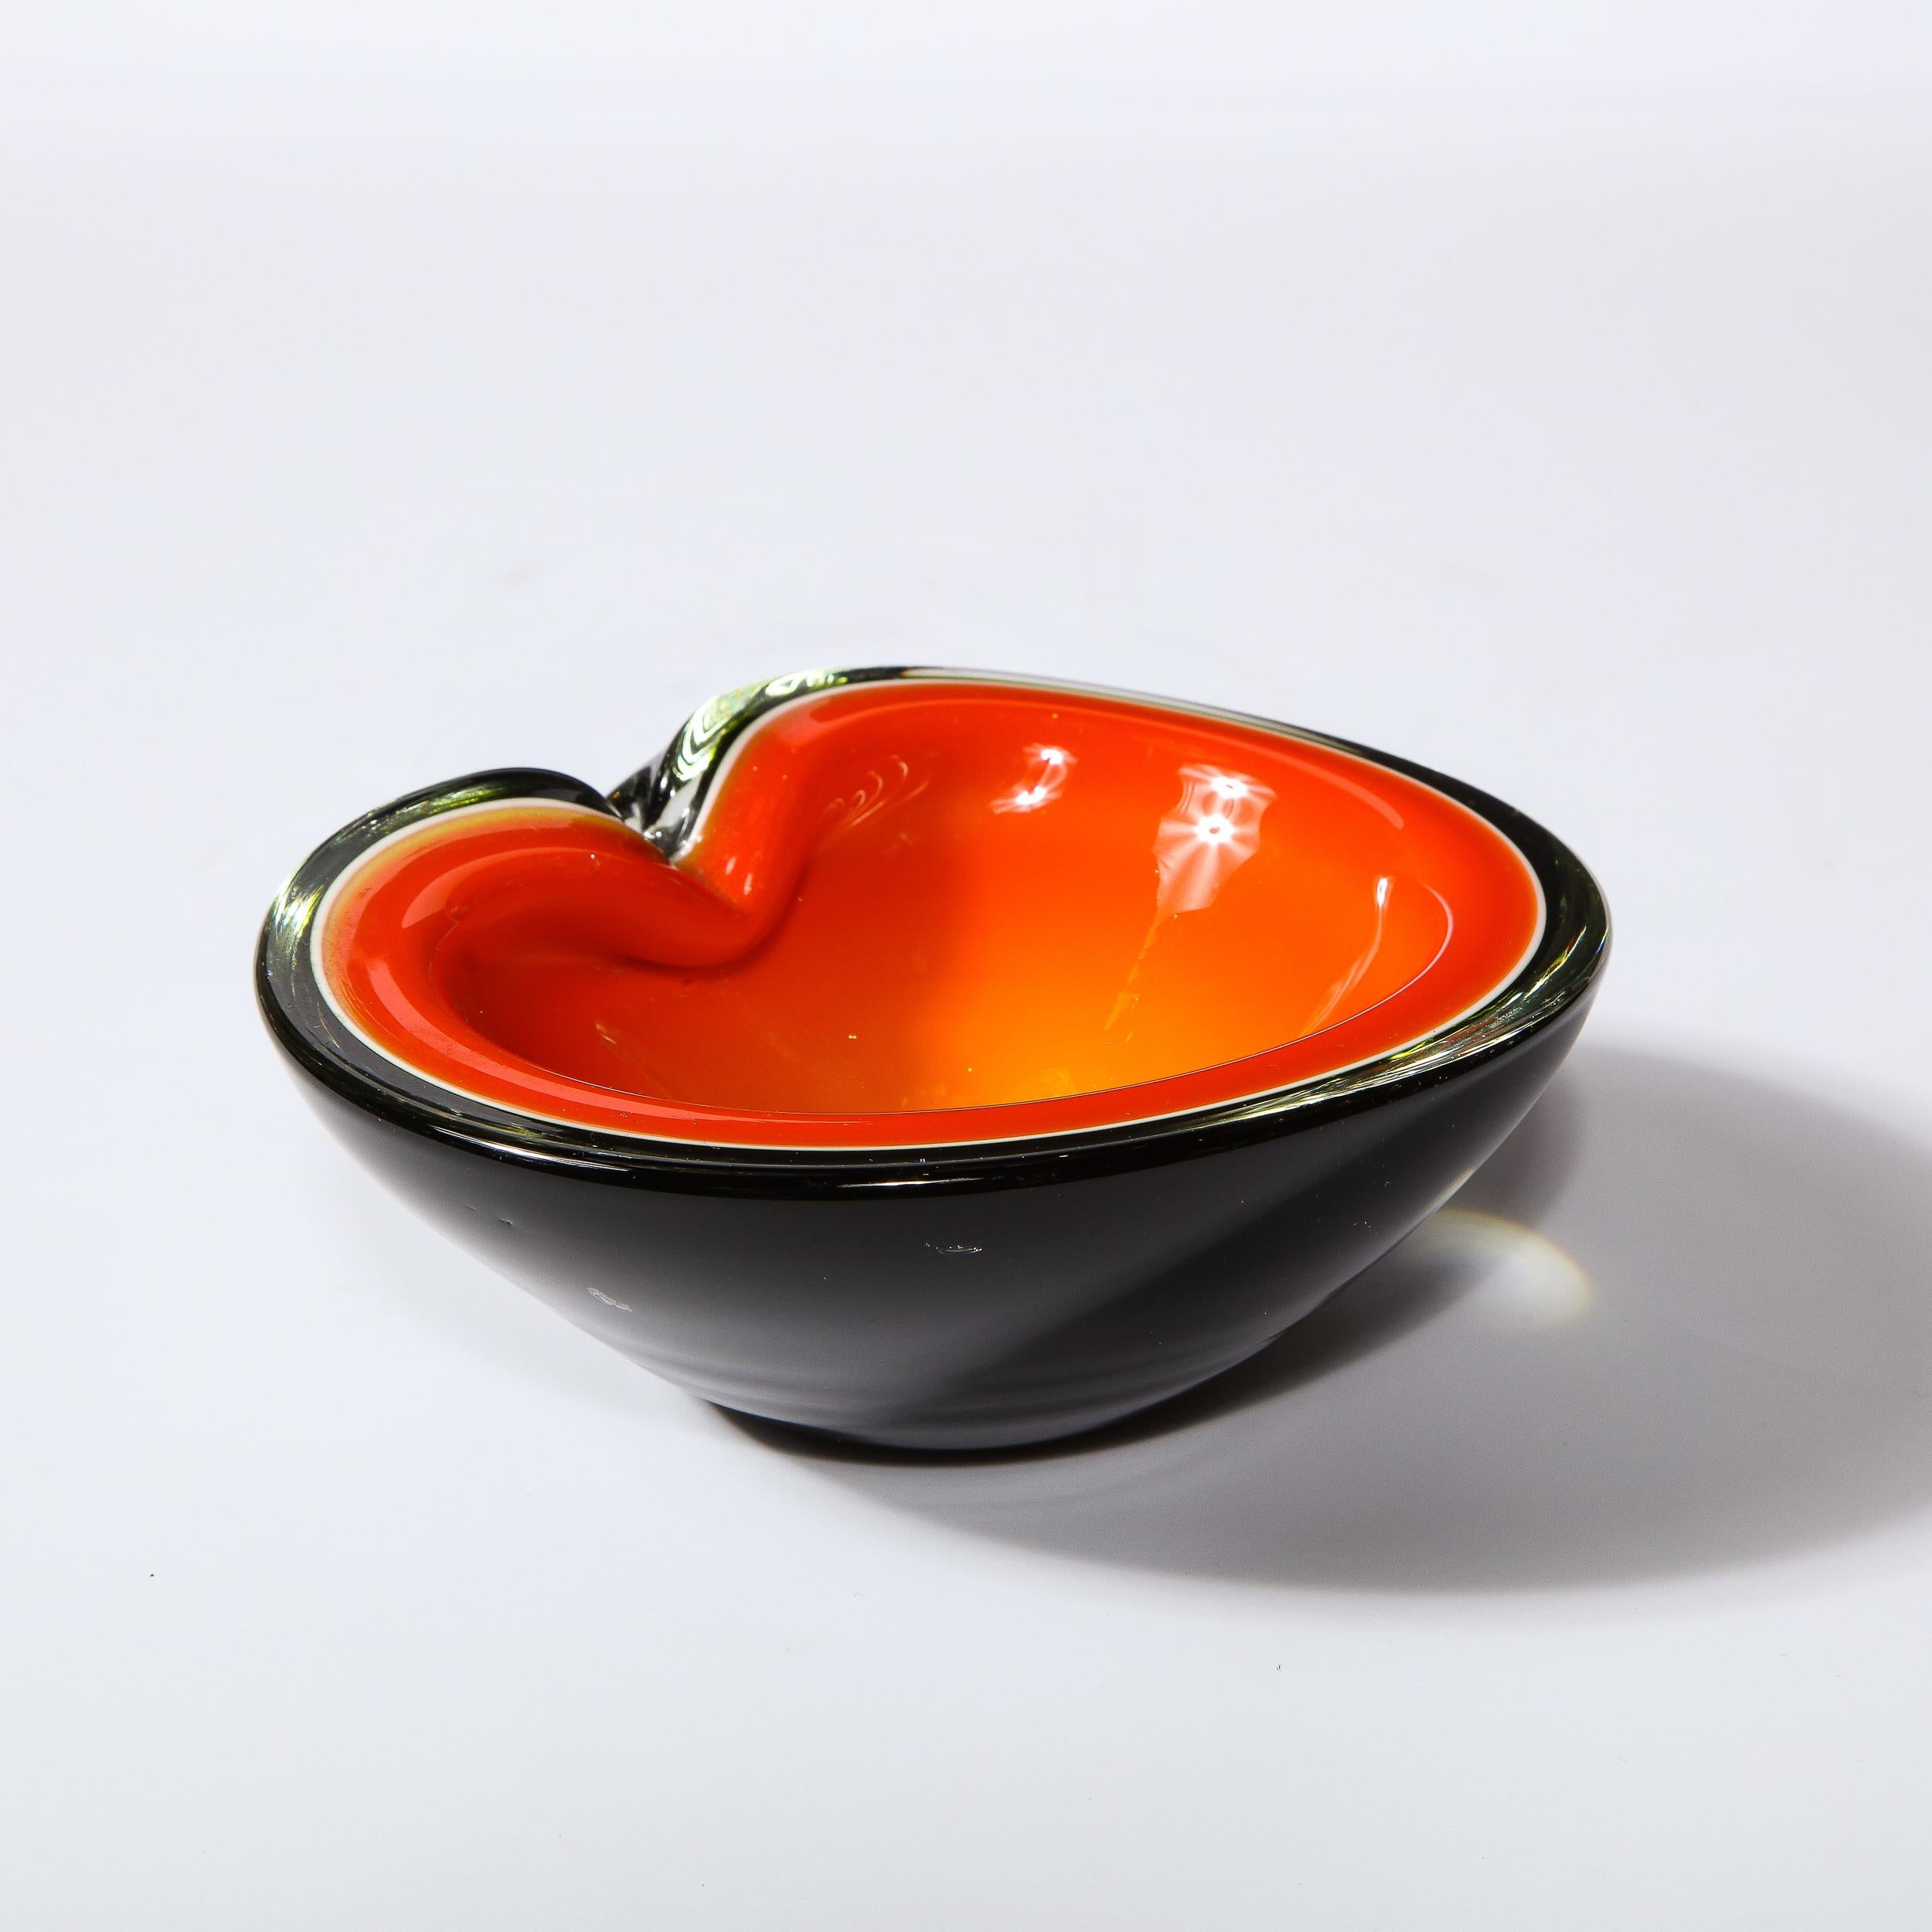 This stunning Mid-Century Modern bowl was realized in Murano, Italy- the island off the coast of Venice renowned for centuries for its superlative glass production. It features a circular form with a pinched scalloped edge; a lava orange interior;